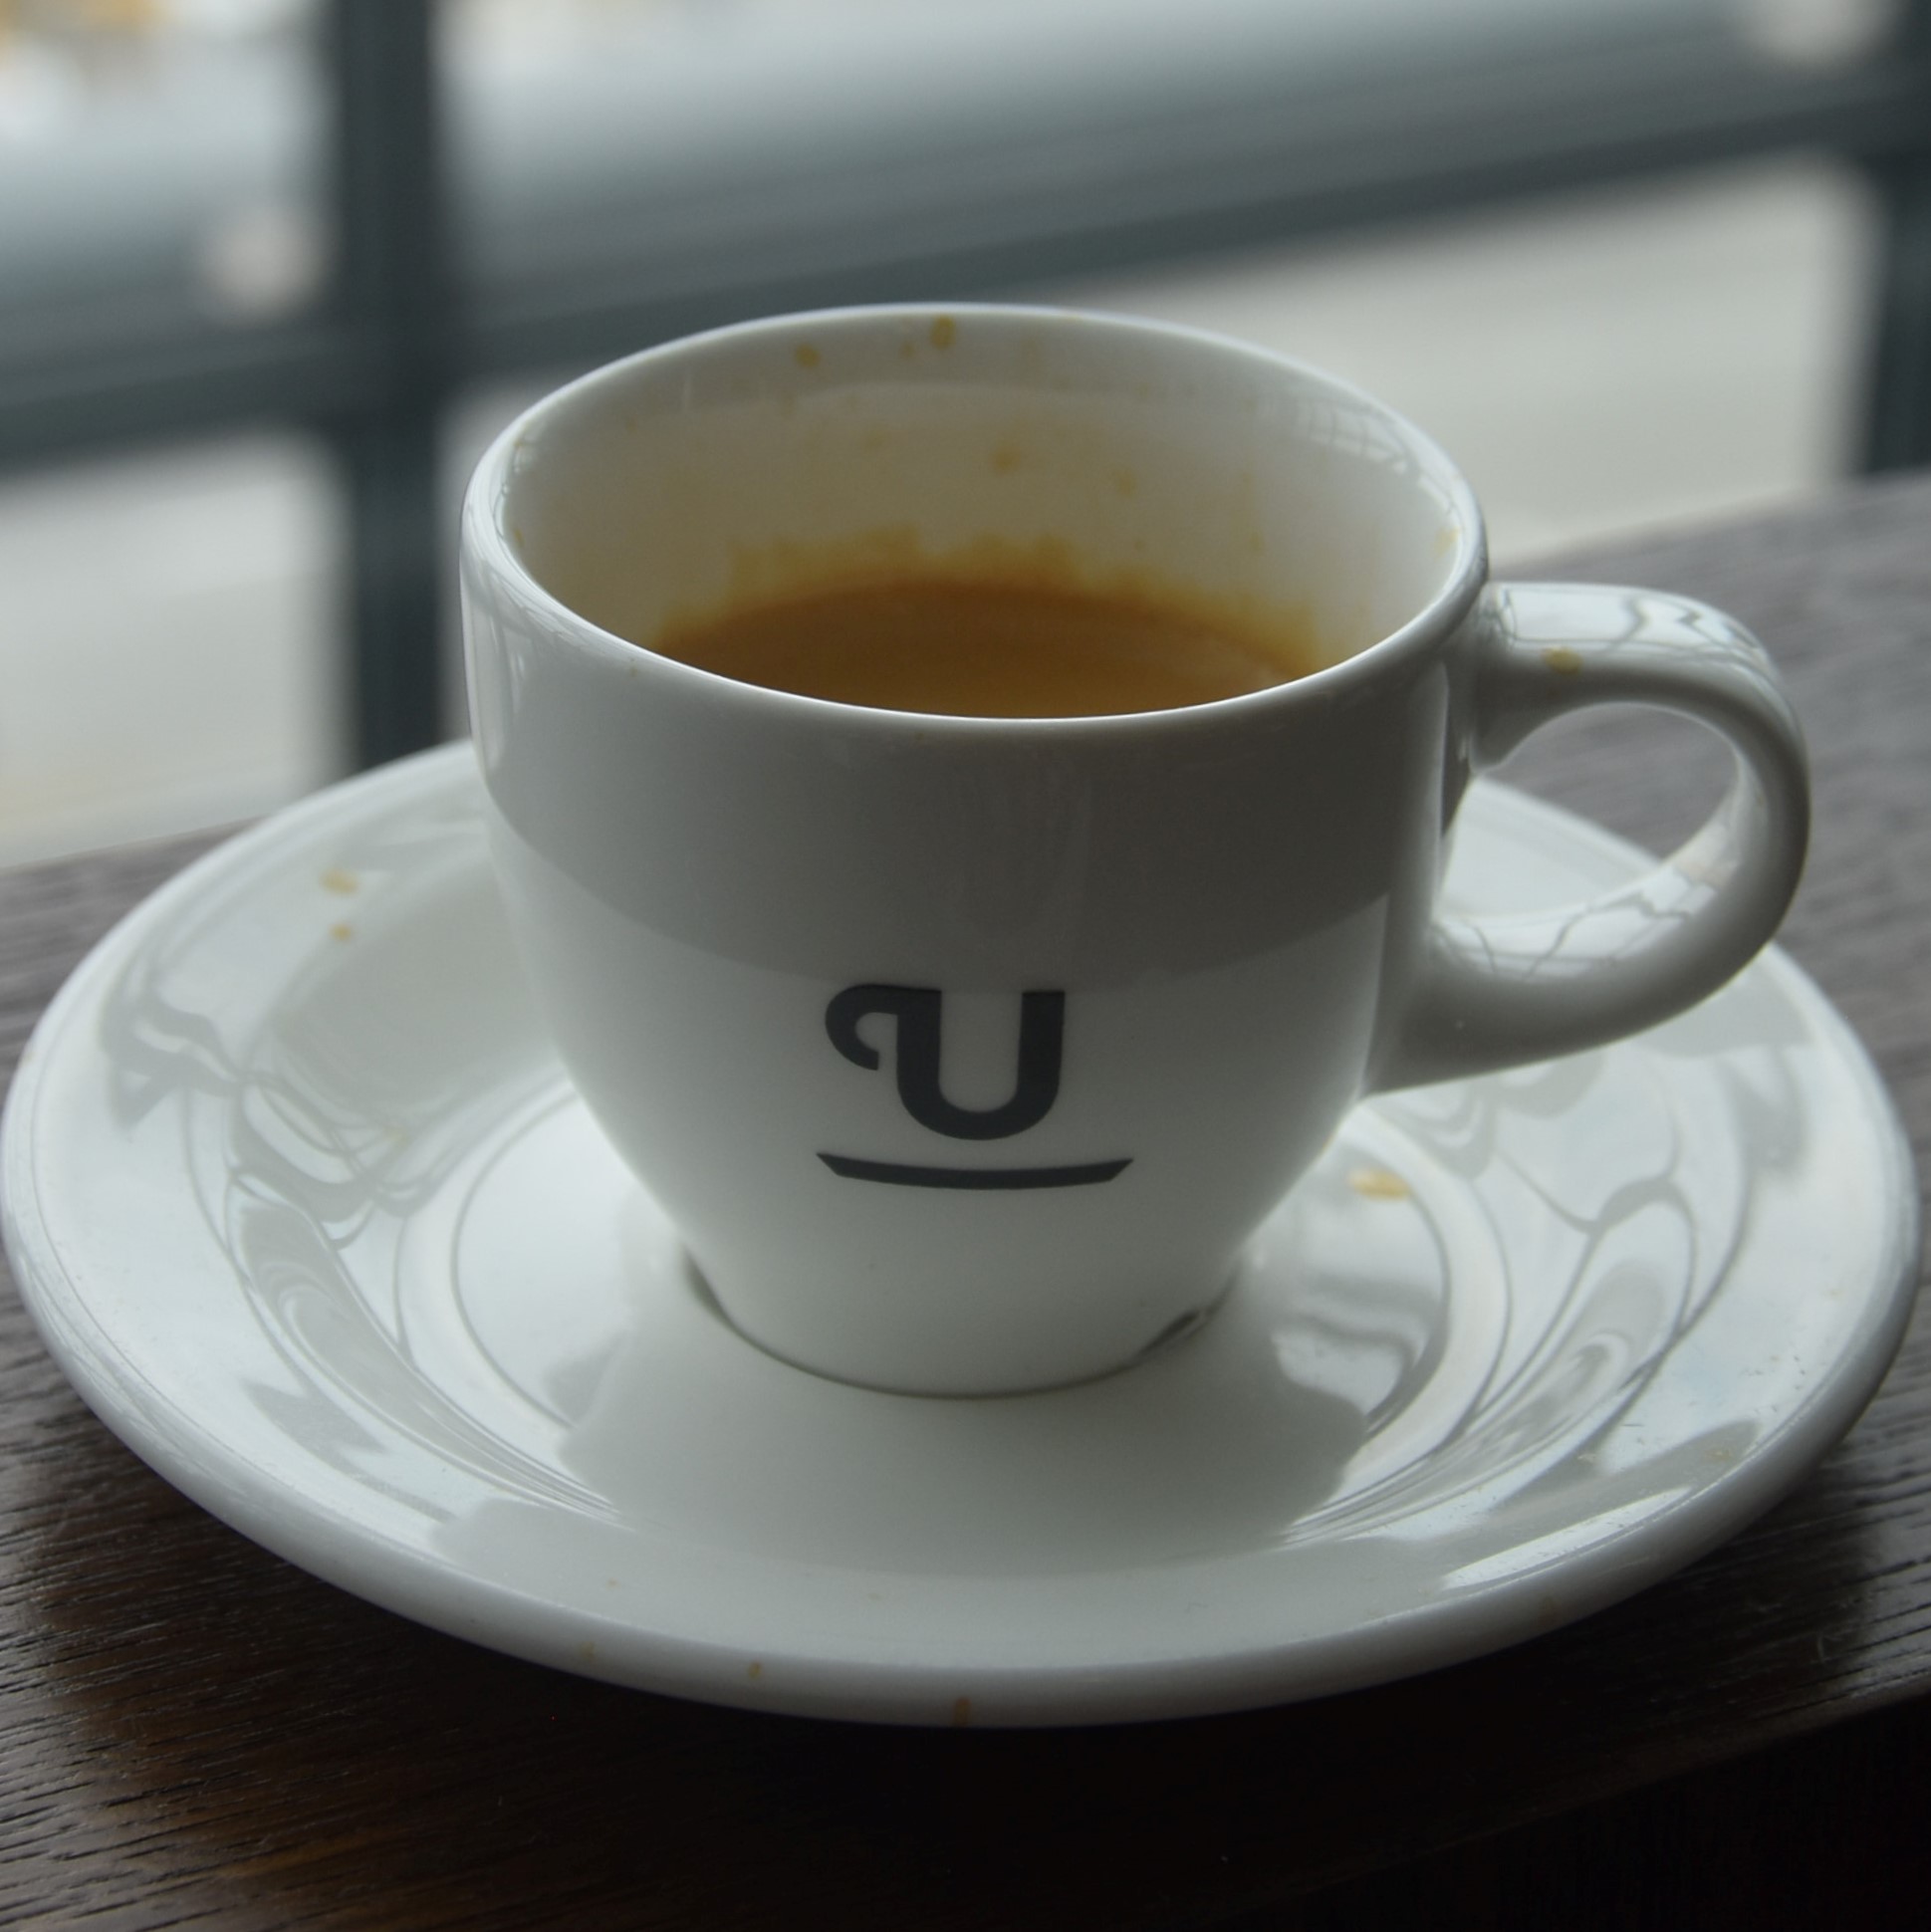 An espresso from the British Airways north lounge in Heathrow's Terminal 5, made using coffee from Union Hand-roasted.